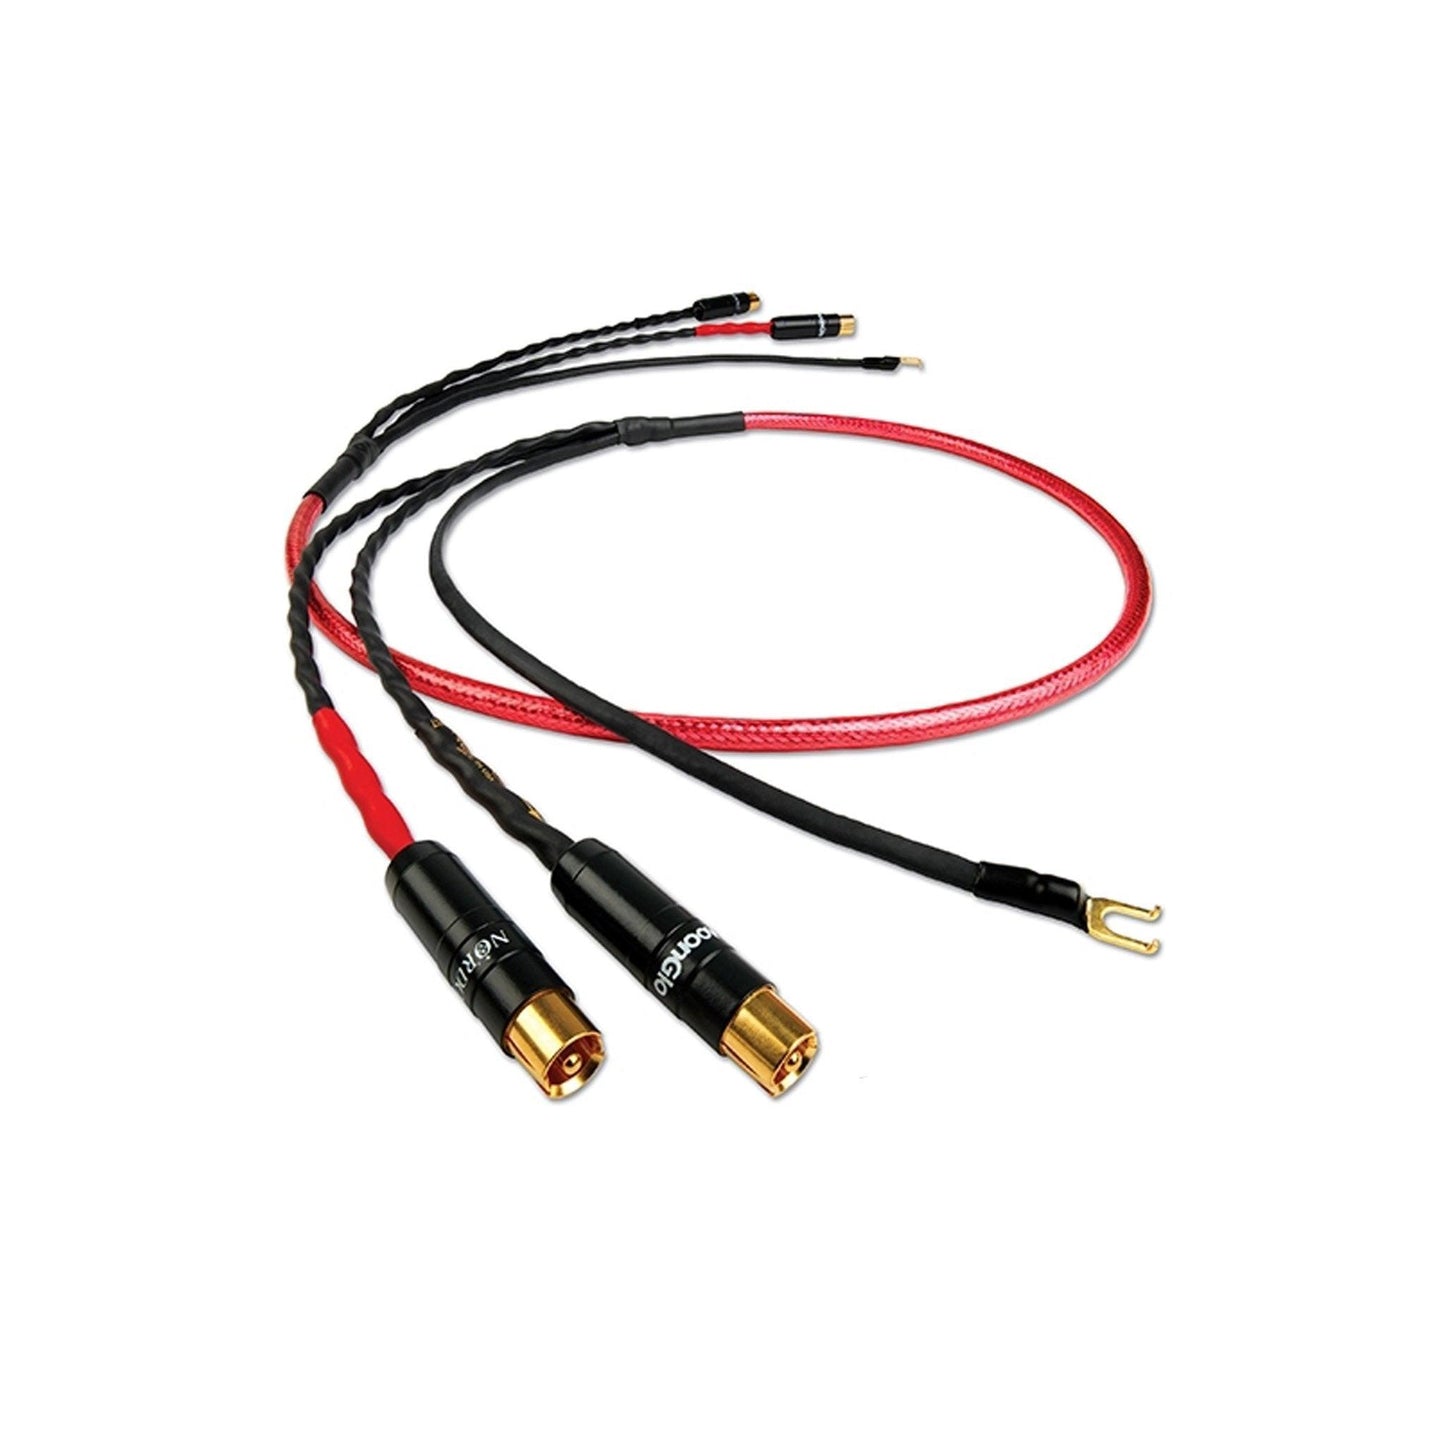 Heimdall 2 Tone Arm Cable - Trimira